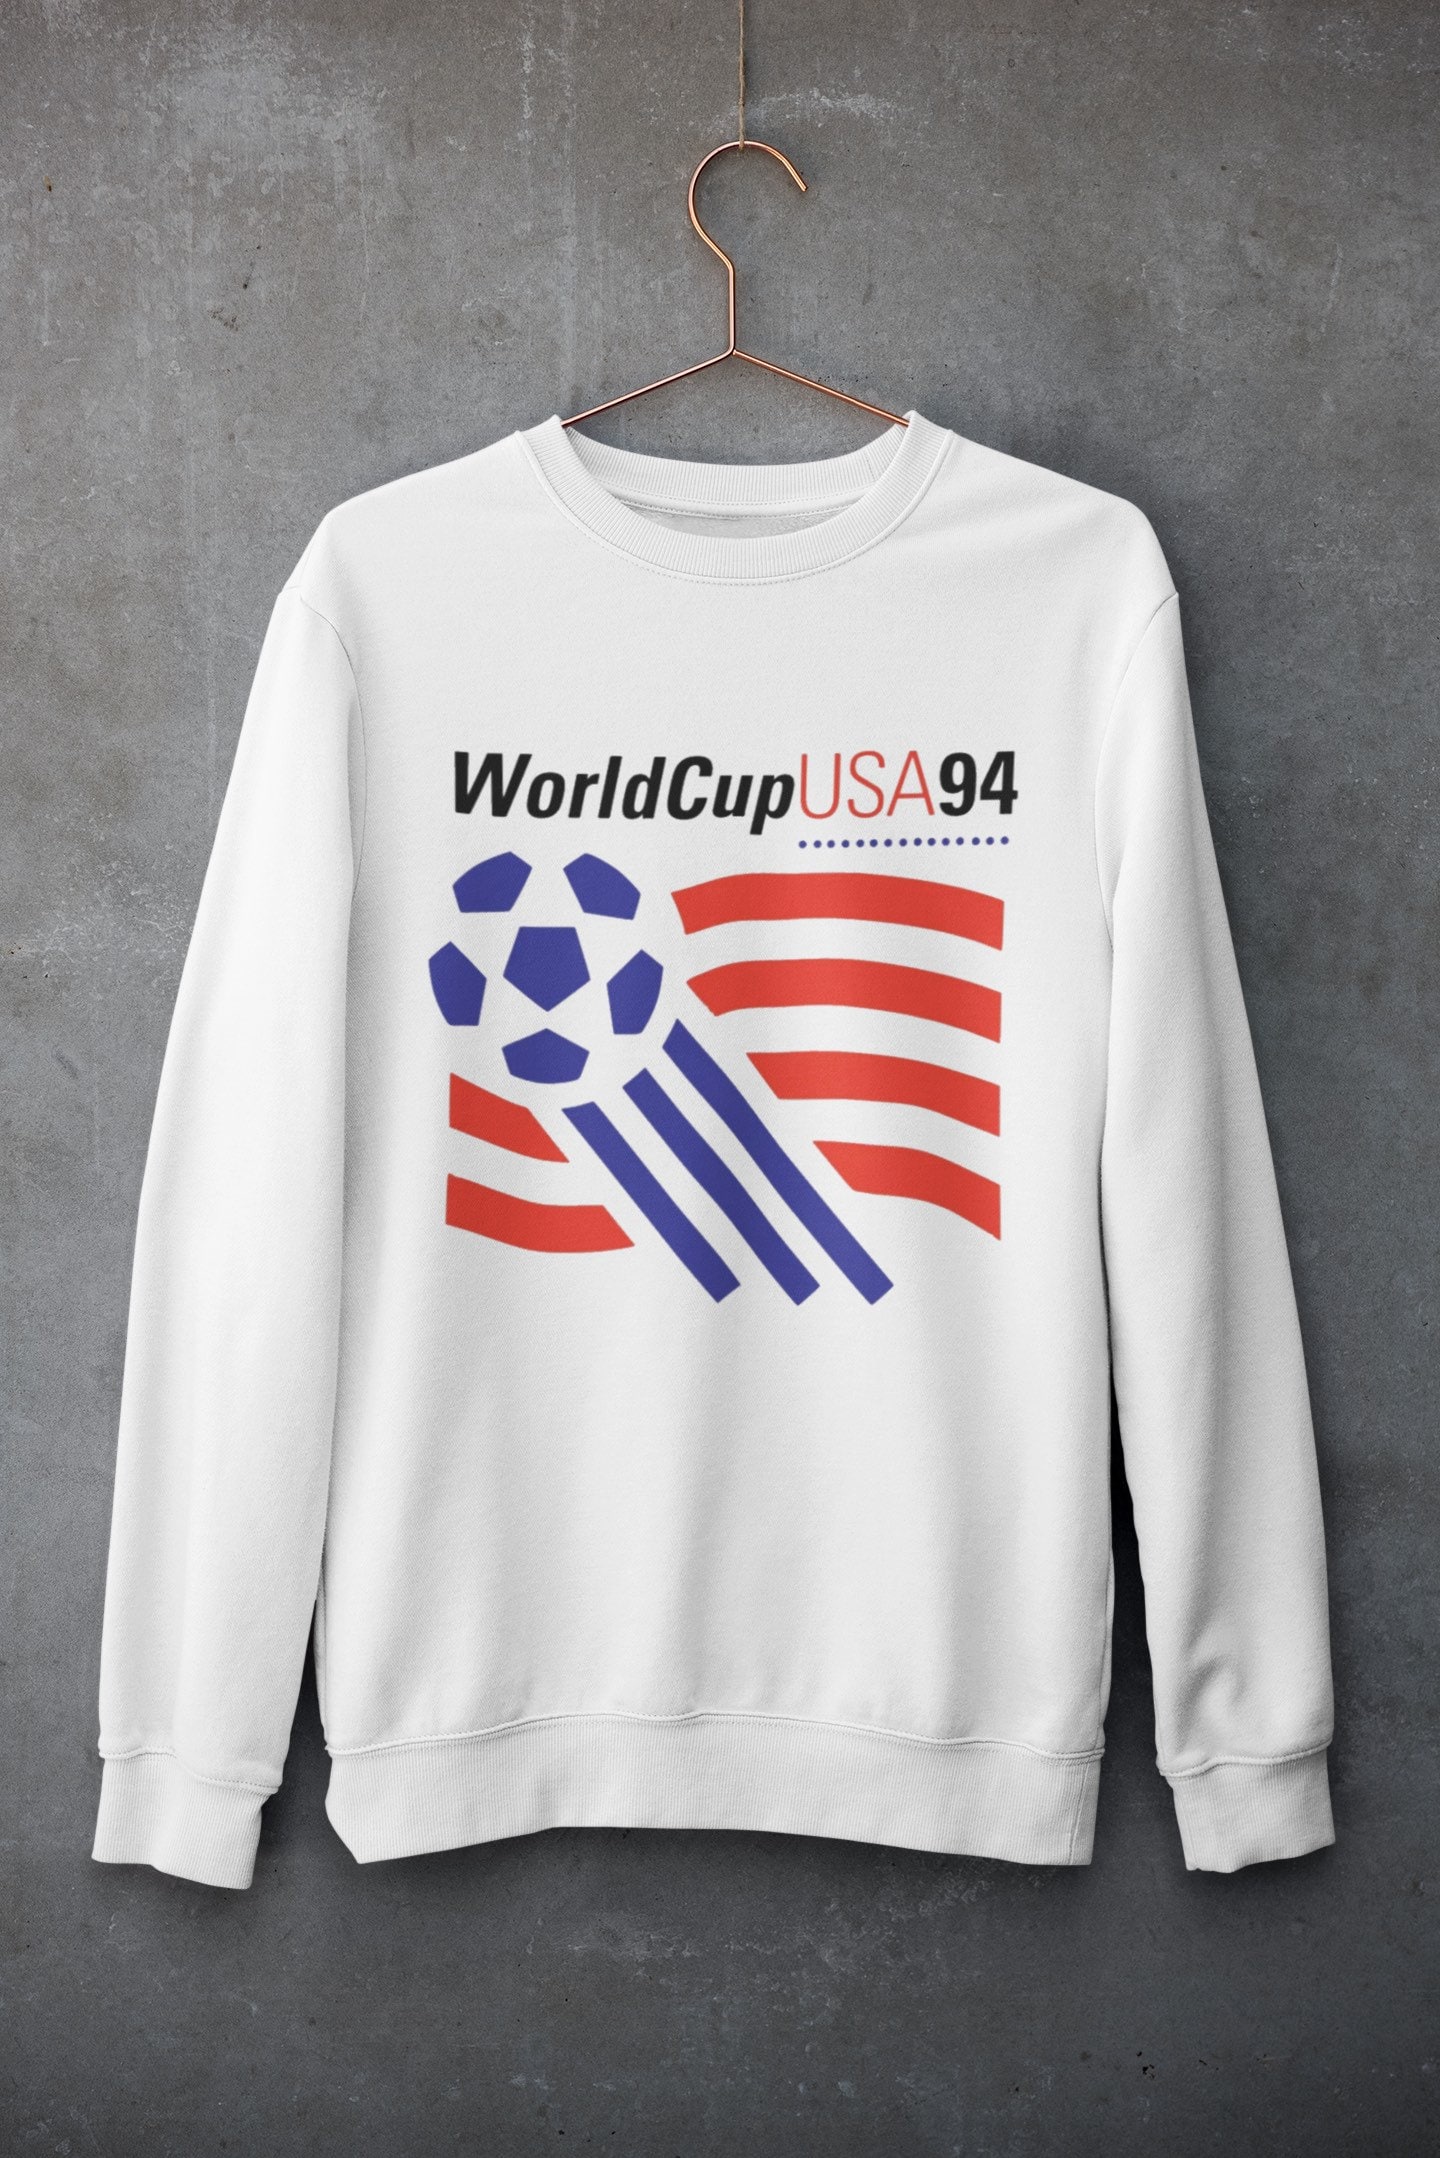 Picked up a long sleeved USA 1994 World Cup jersey that I didn't